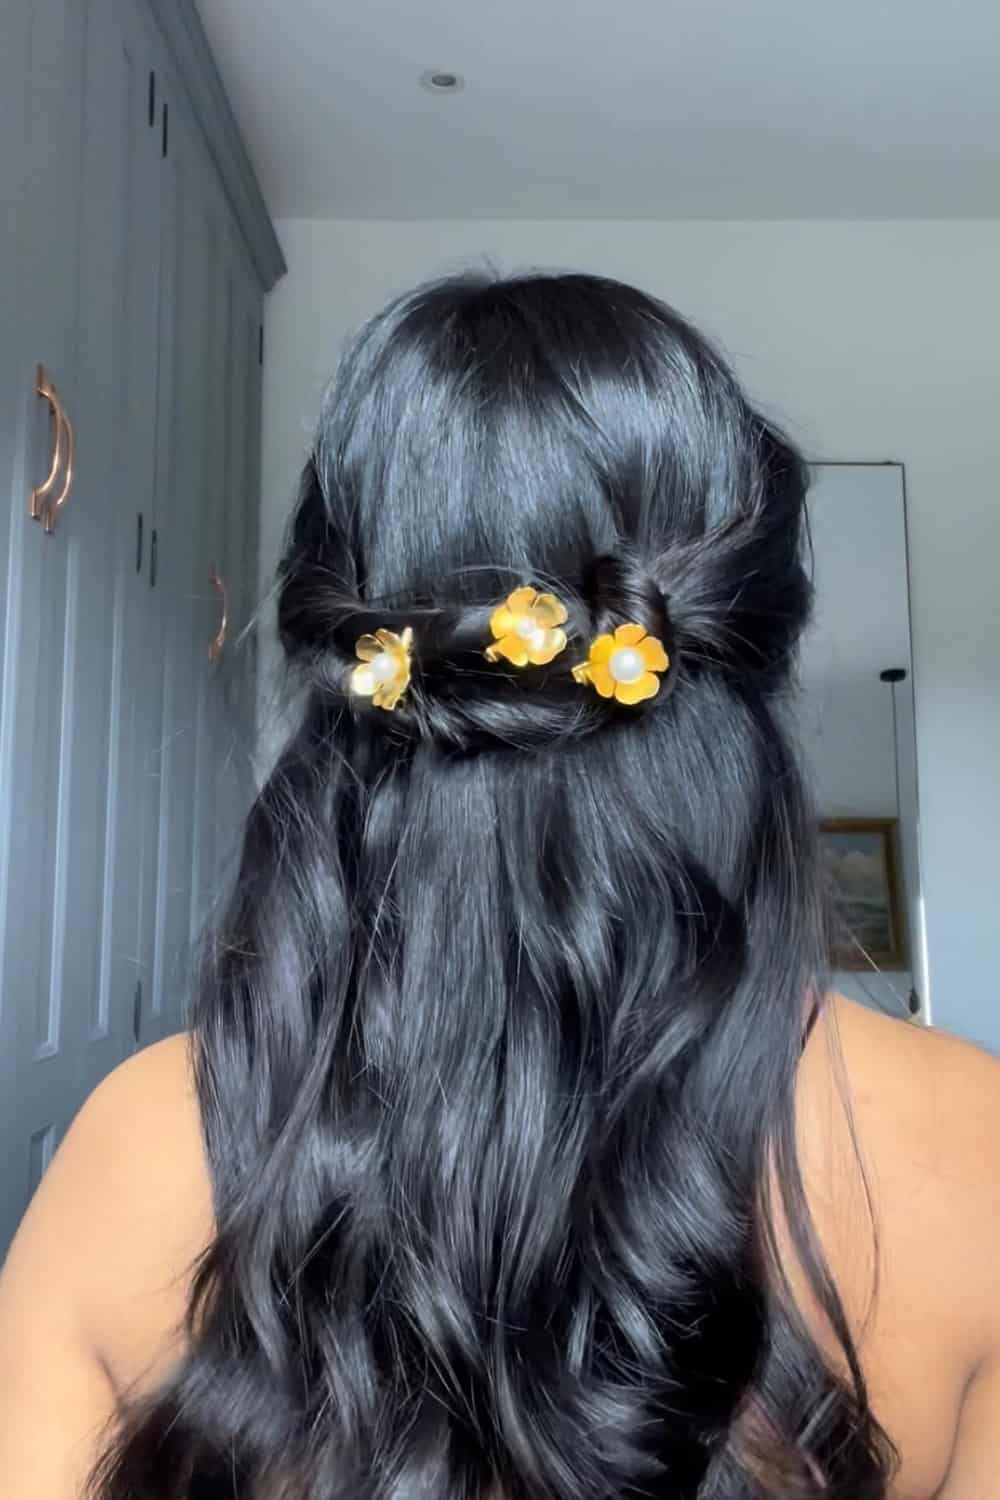 Party Hair Style for Long Hair - Half Tie Curls